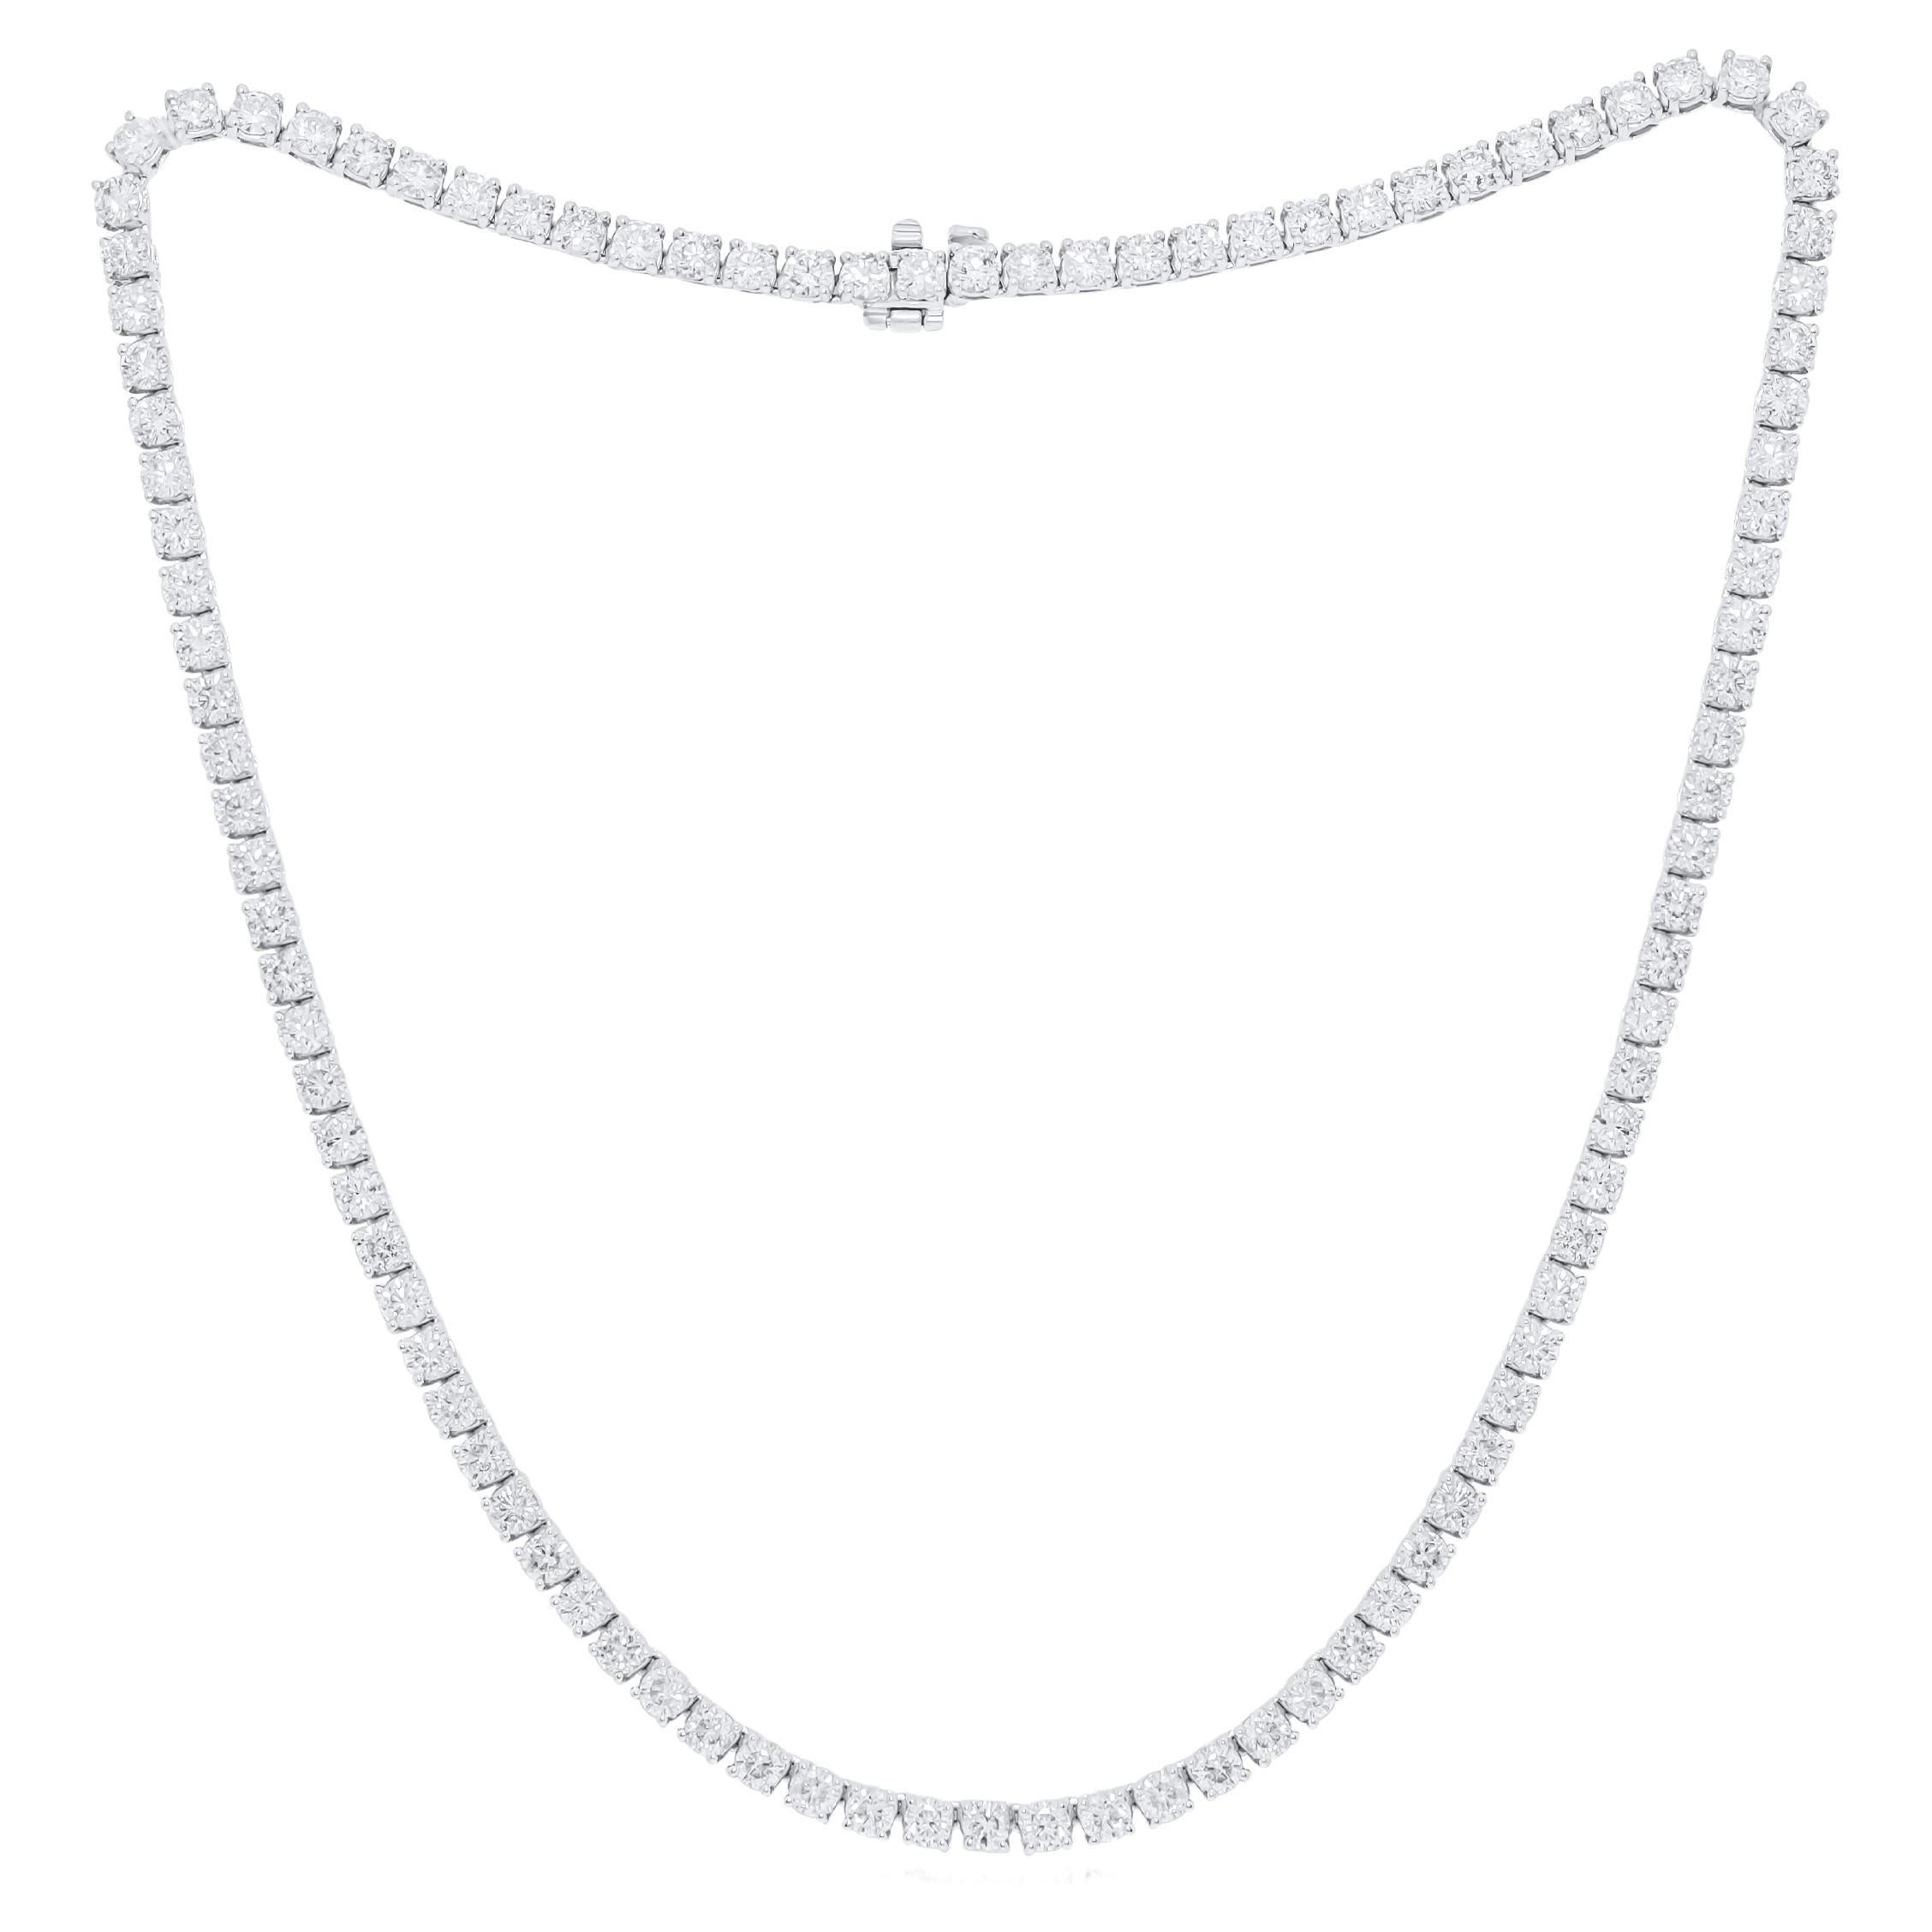 Diana M. Custom 12.00 cts Round Diamond 14k White Gold Tennis Necklace For Sale